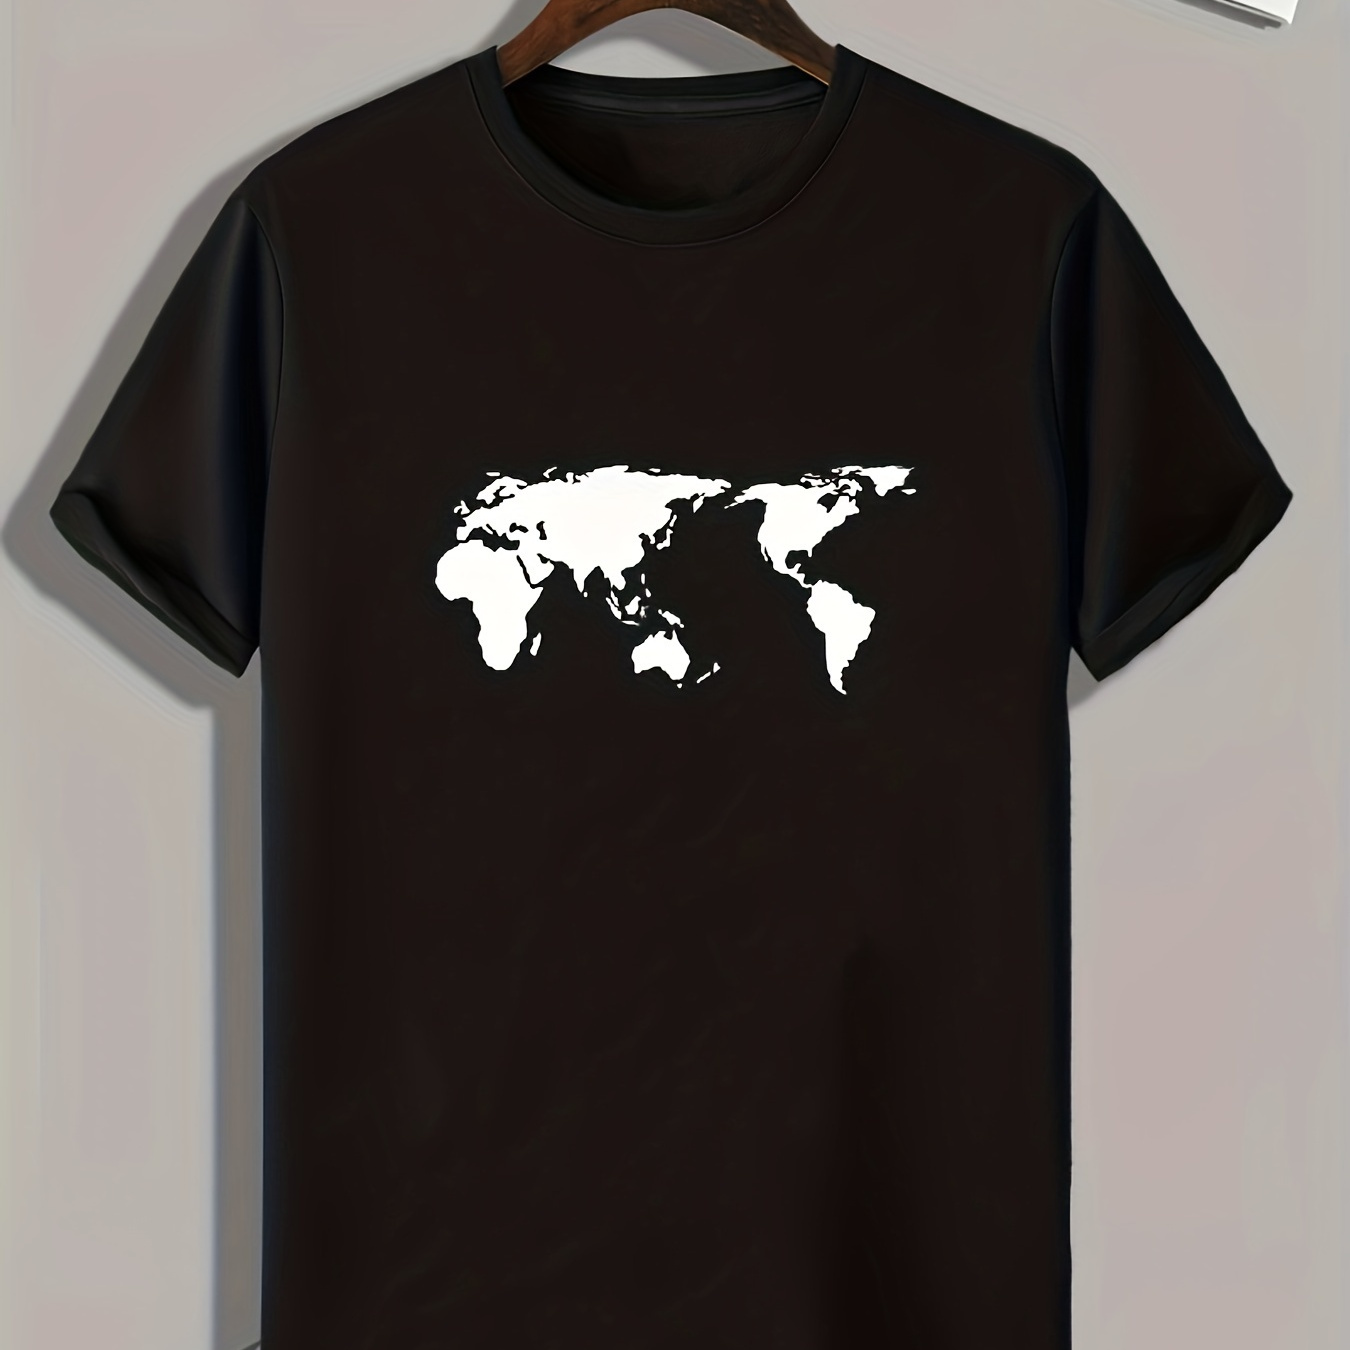 

World Territory Print, Men's Graphic T-shirt, Casual Comfy Tees For Summer, Mens Clothing